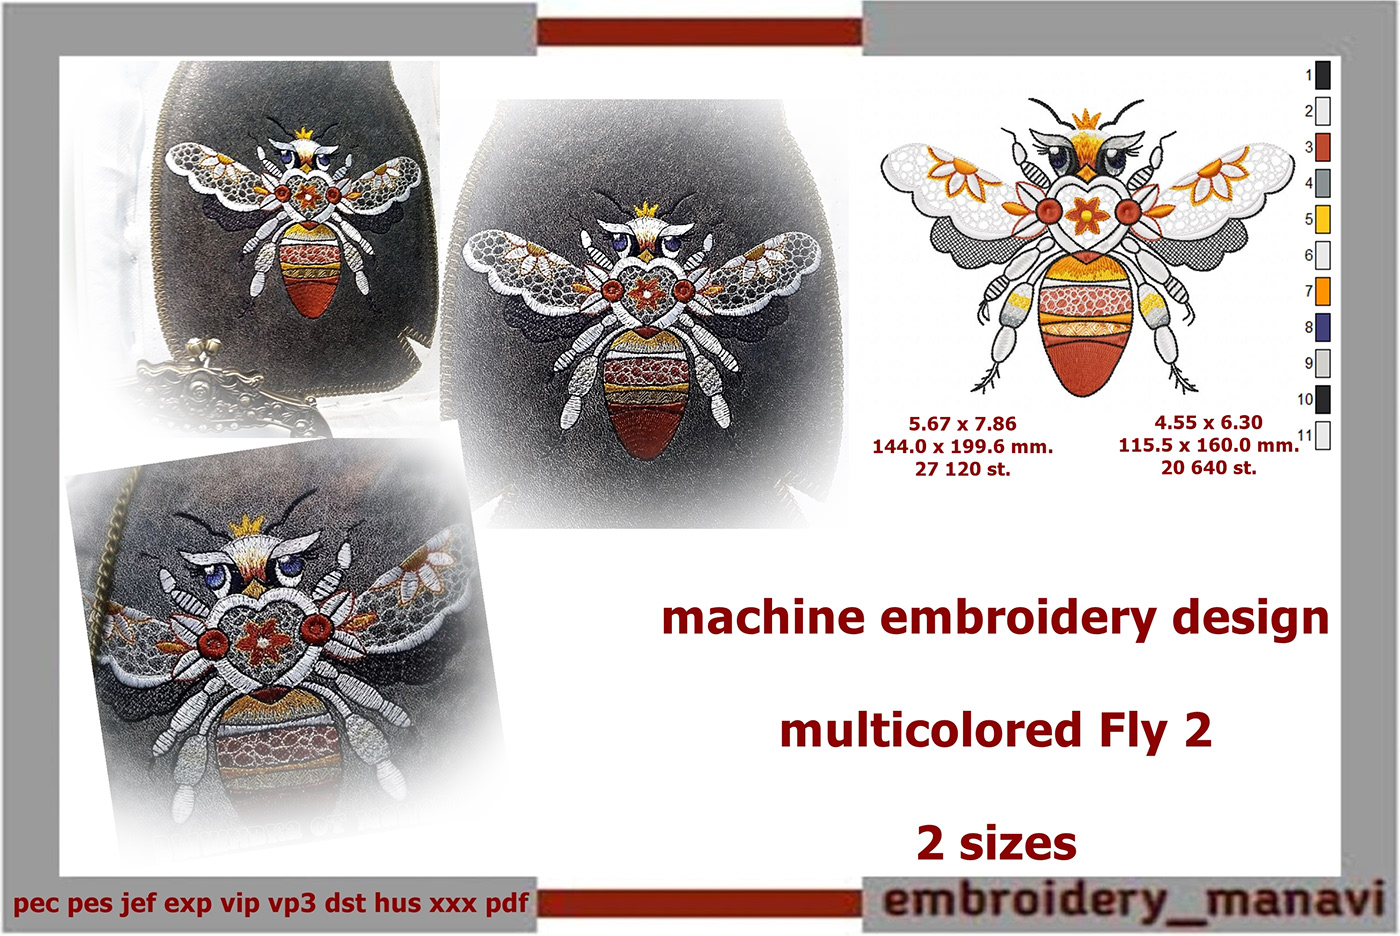 Machine embroidery design multicolored Fly 2 in 2 sizes from Embroidery Manavi 05